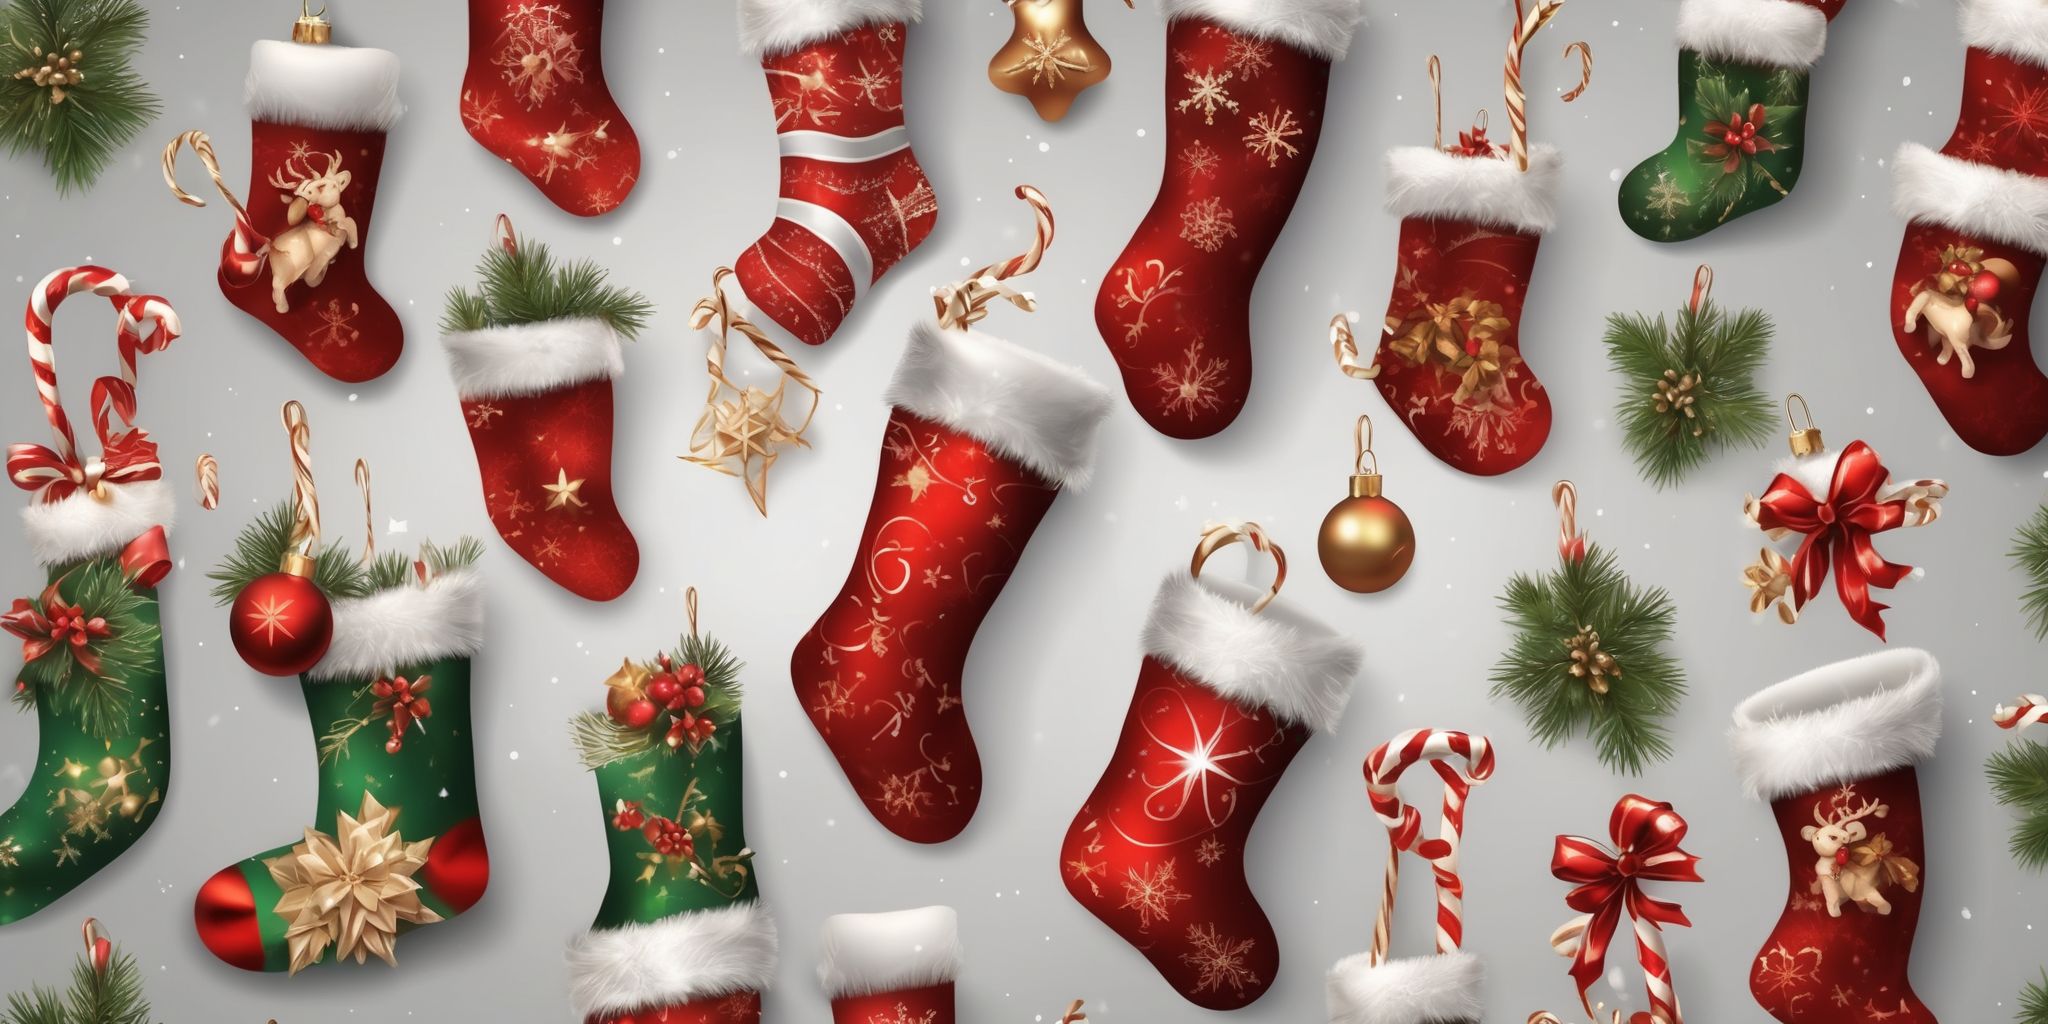 Stockings in realistic Christmas style